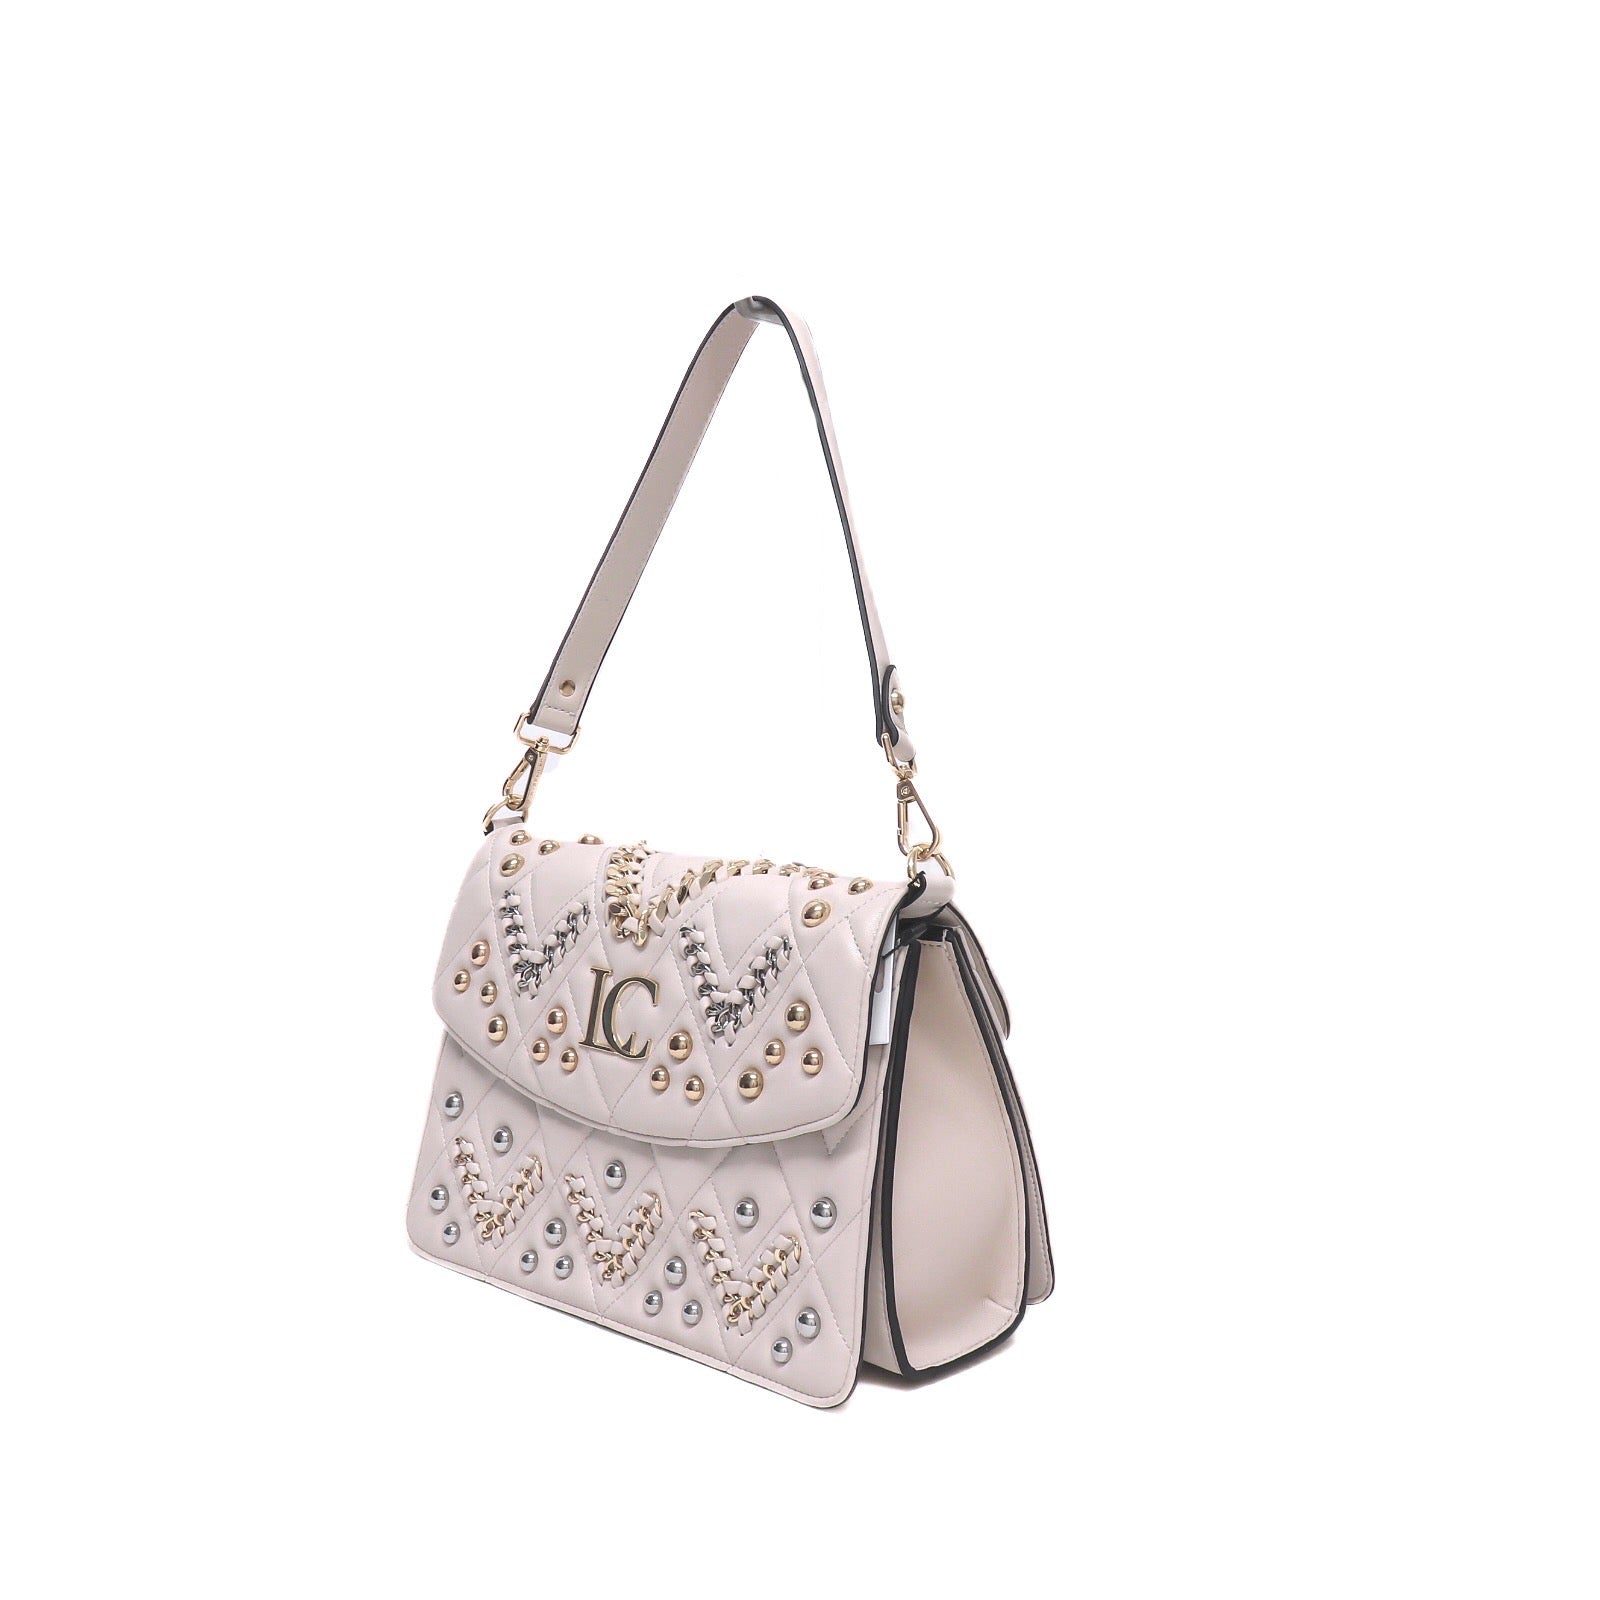 The Carrie Bag Sapphire Bag